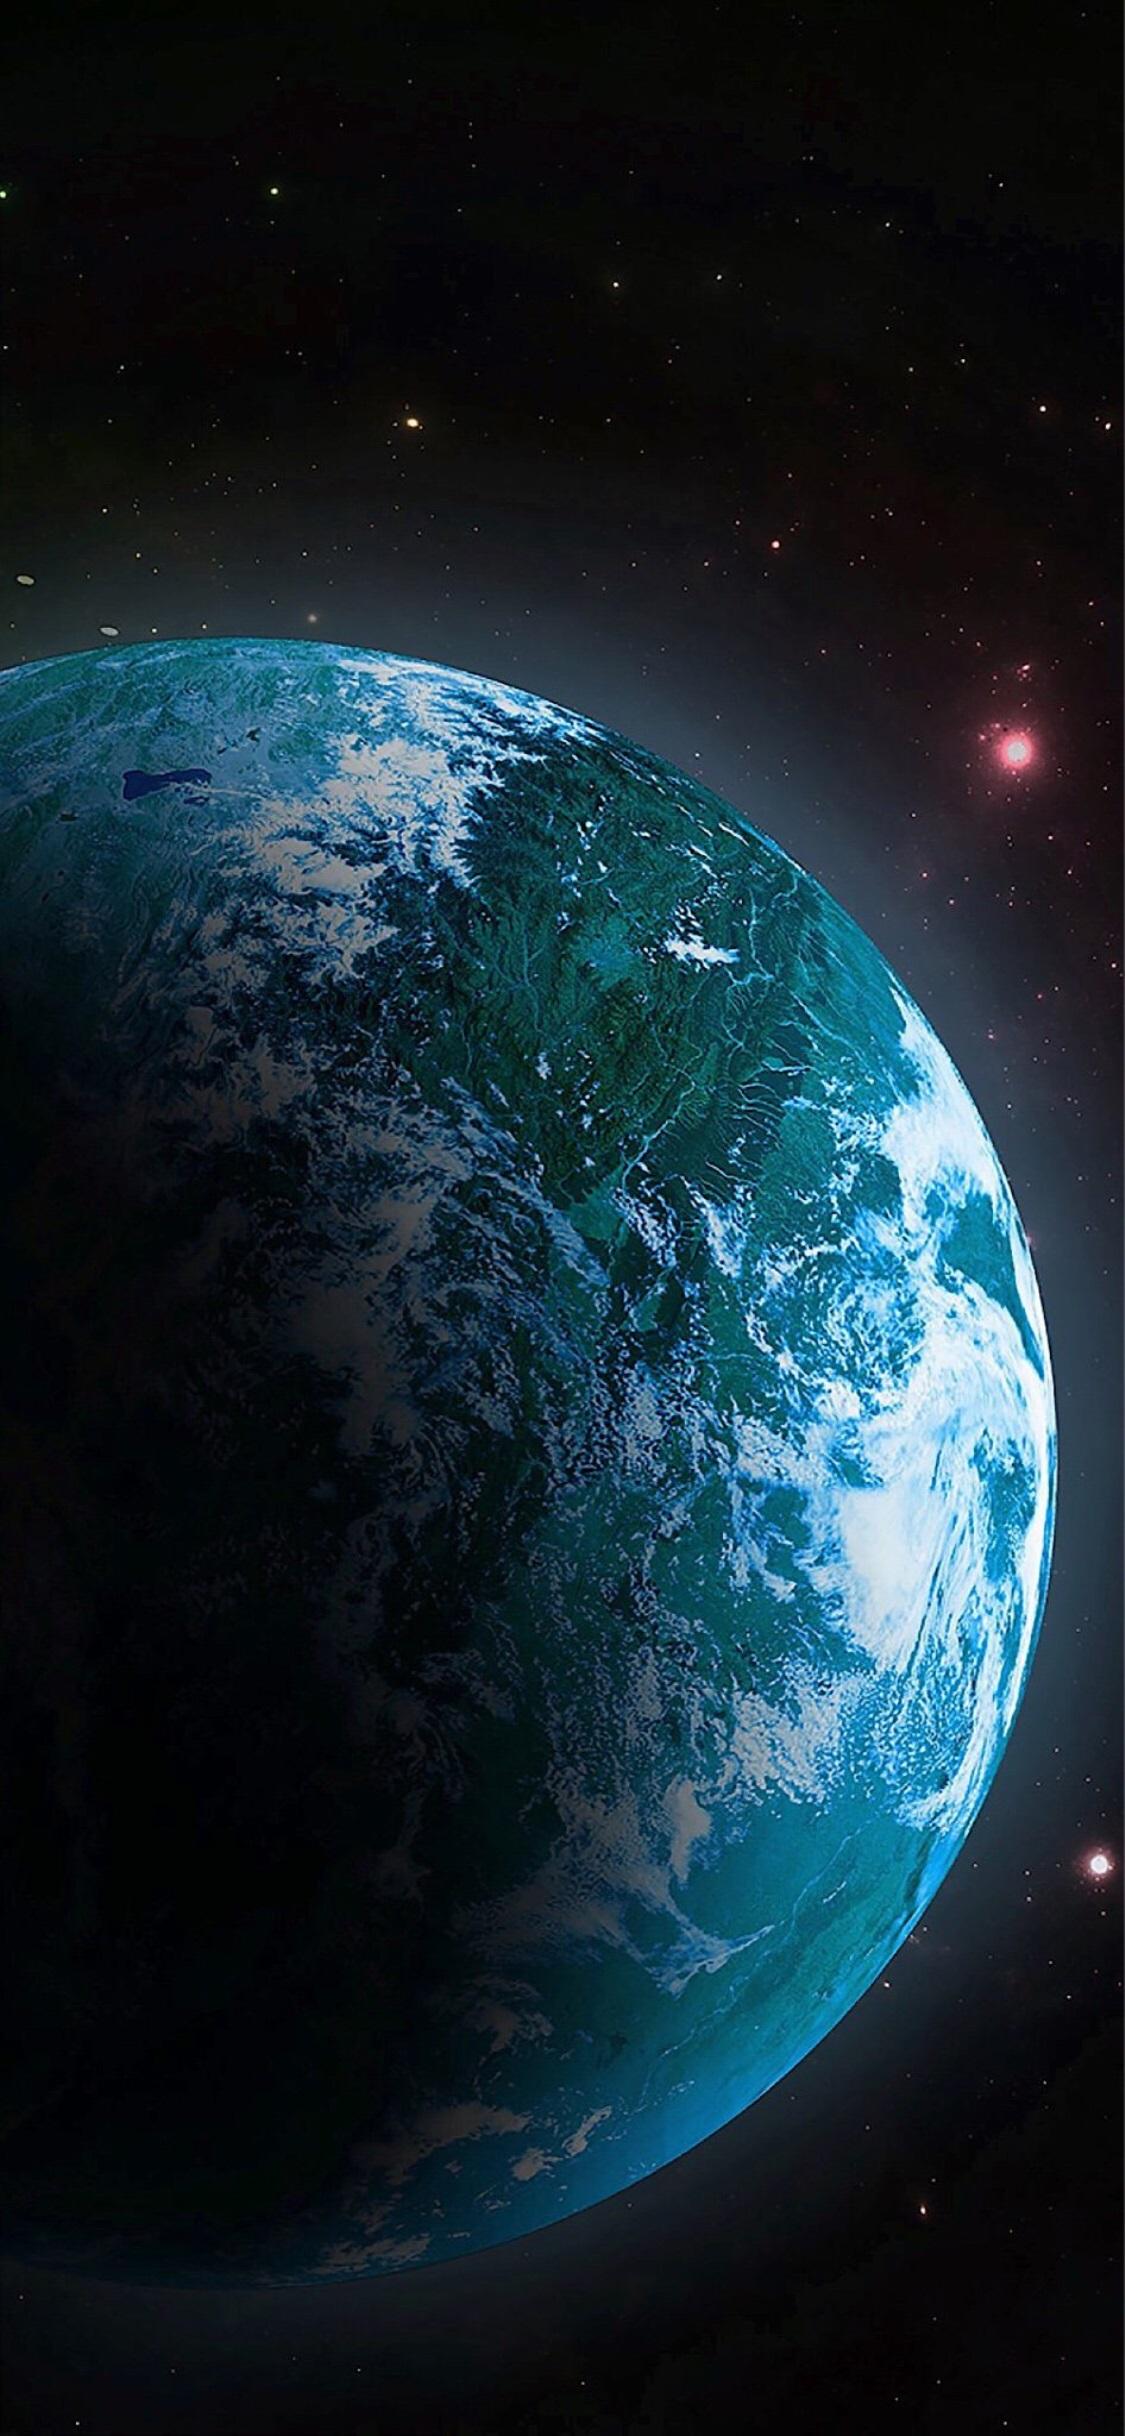 iPhone x wallpaper earth. Download free HD image and picture